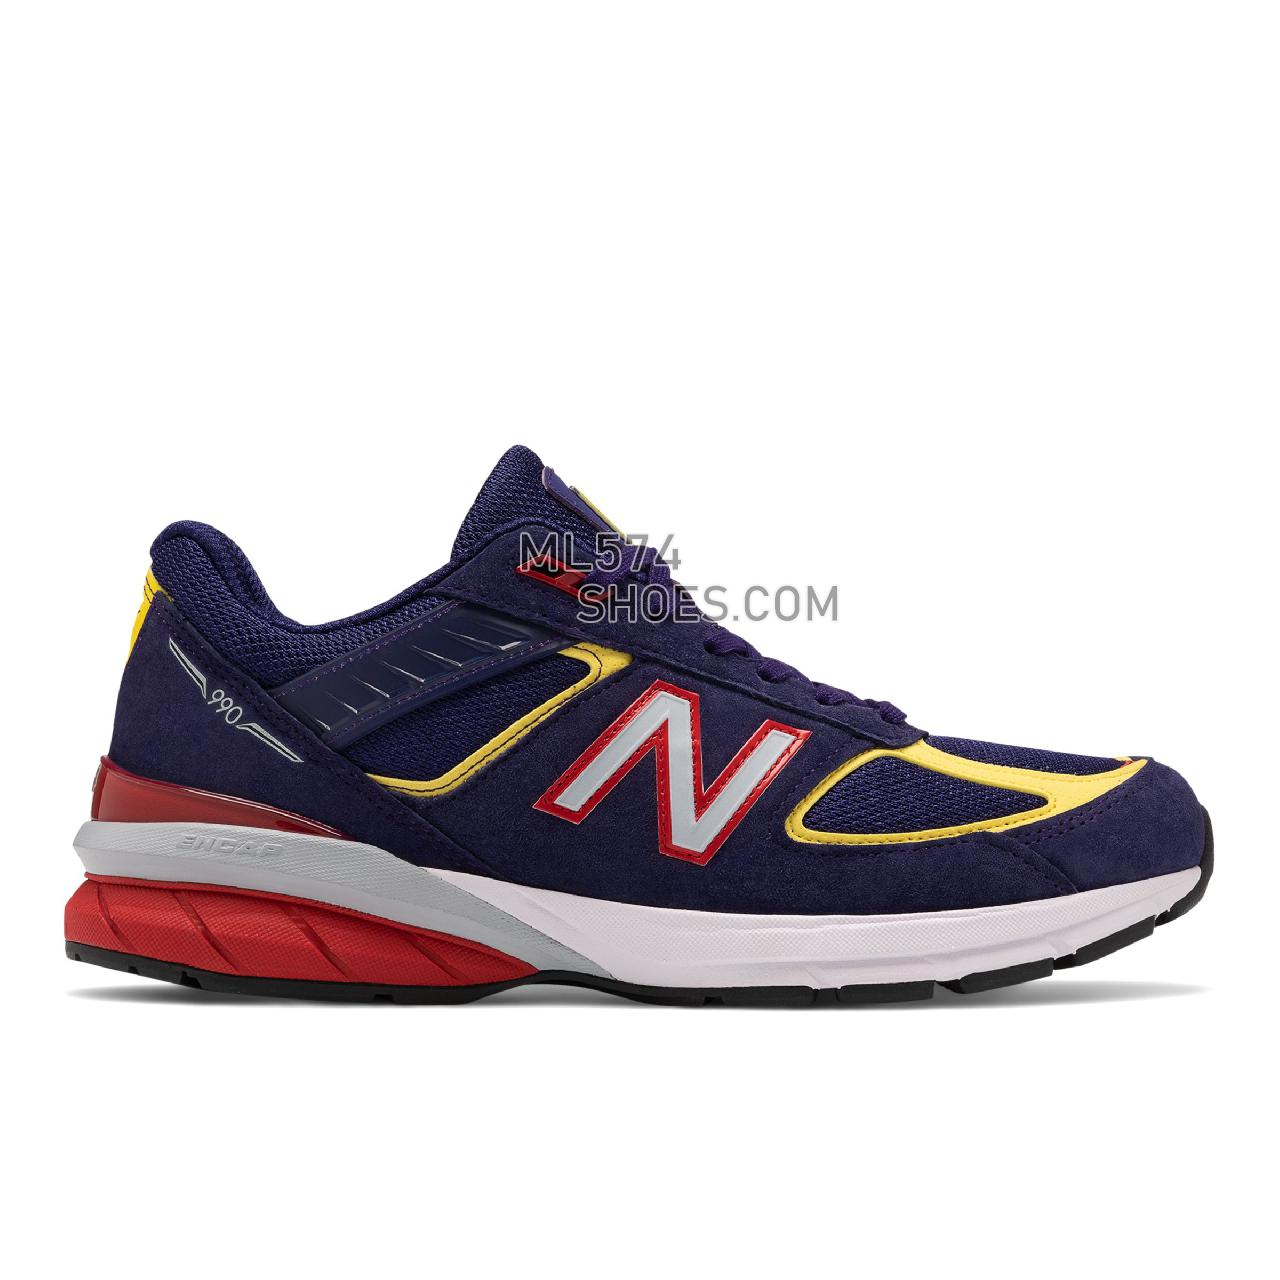 New Balance Made in USA 990v5 - Men's Neutral Running - Virtual Violet with First Light - M990GA5